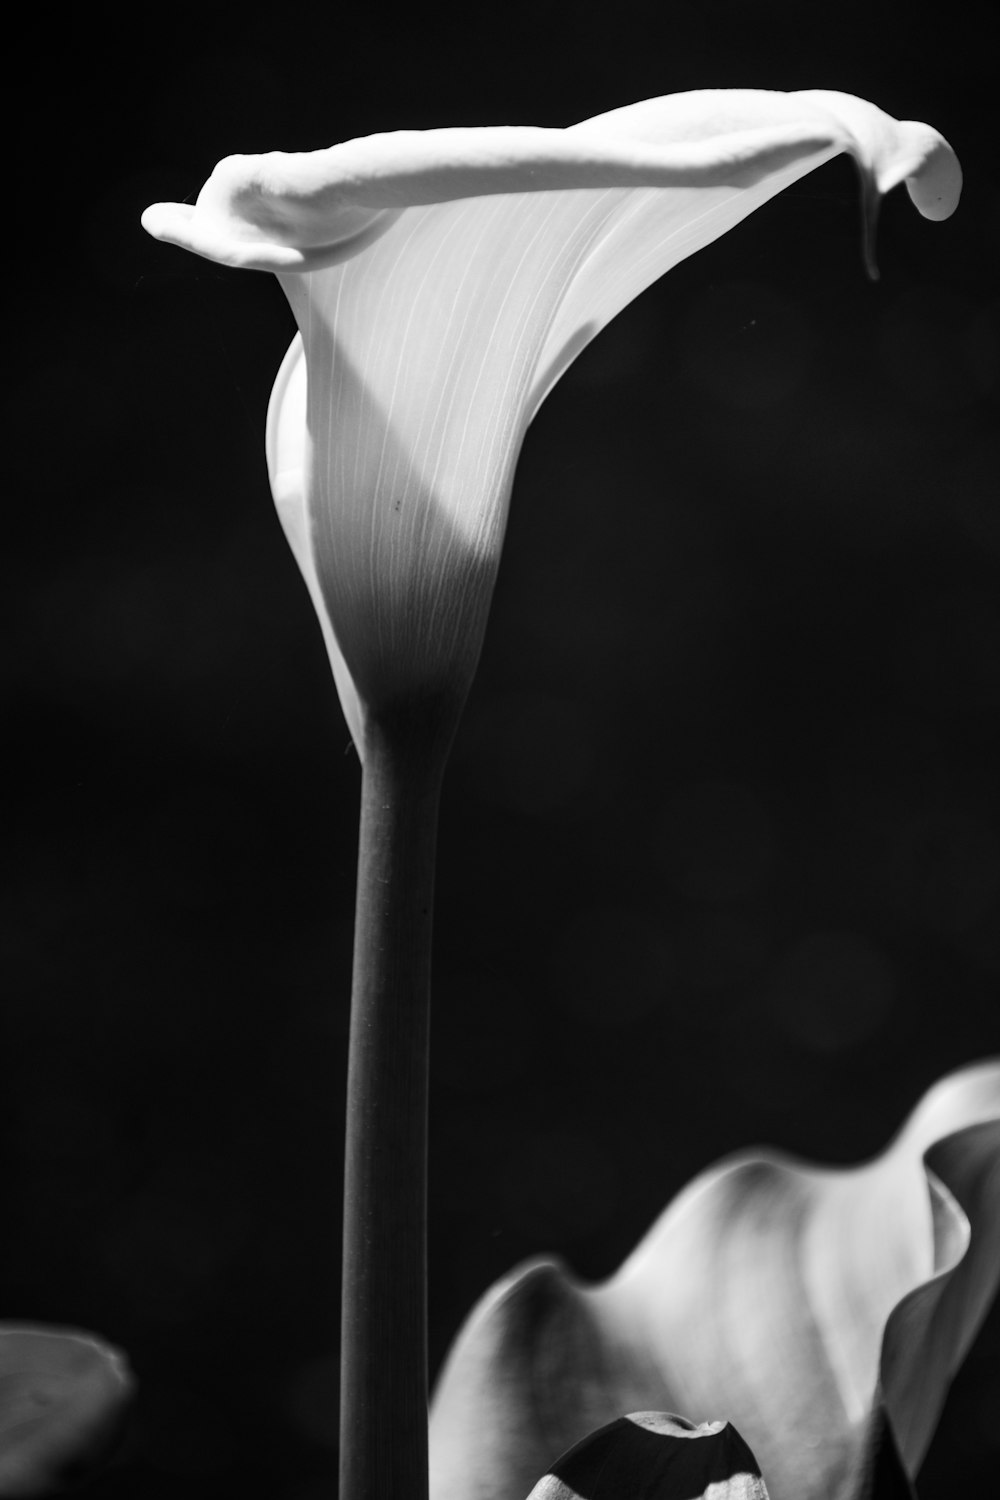 a black and white photo of a flower